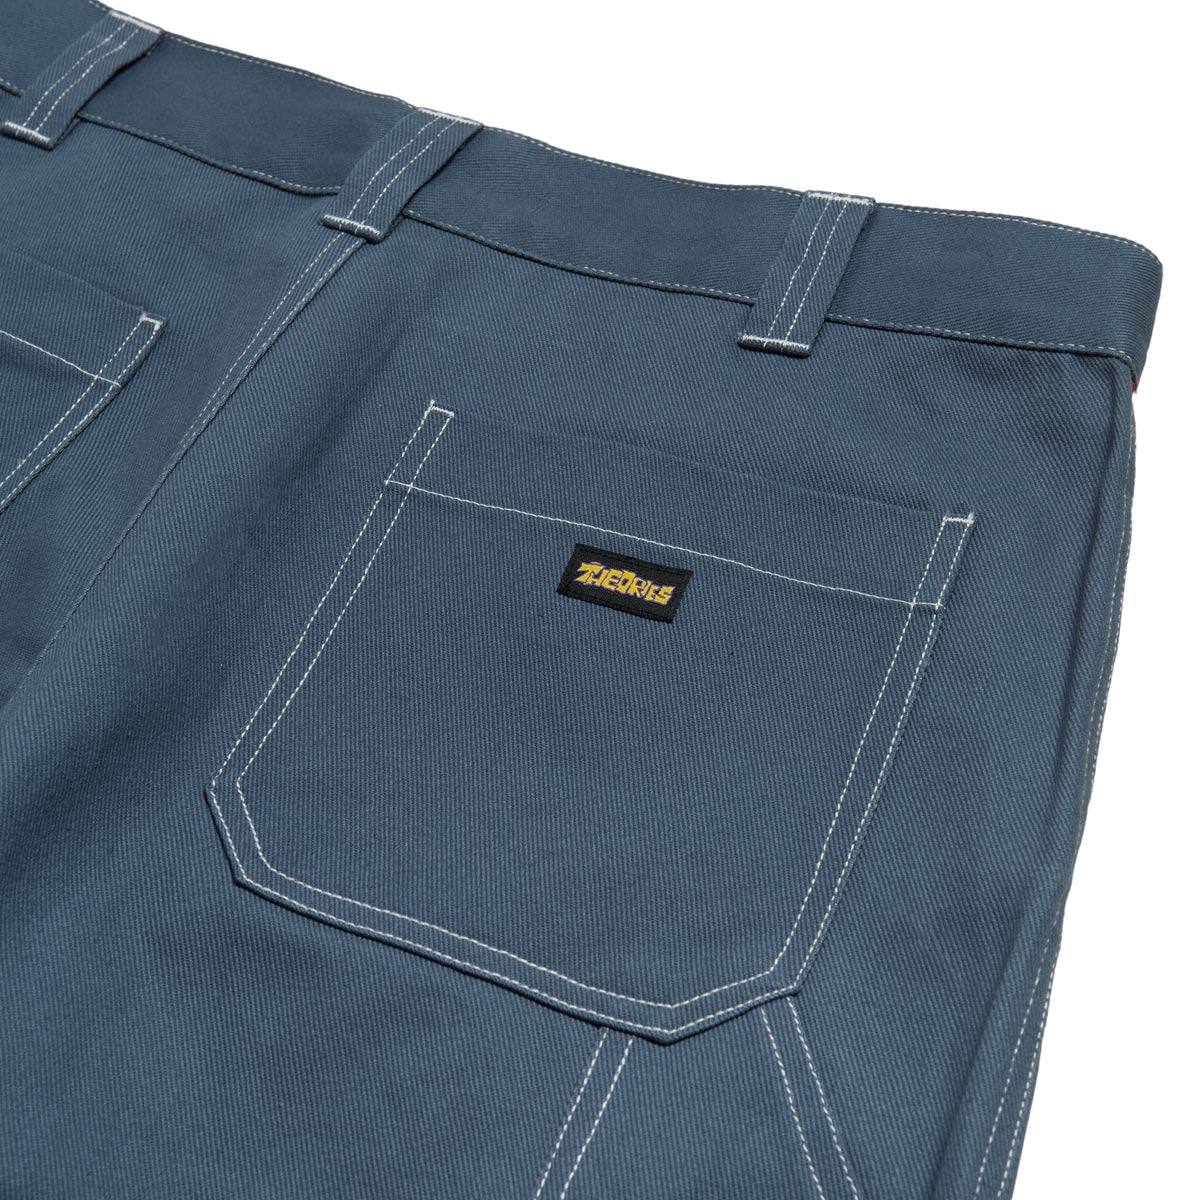 Theories Piano Trap Carpenter Pants - Slate Blue Contrast Stitch image 4